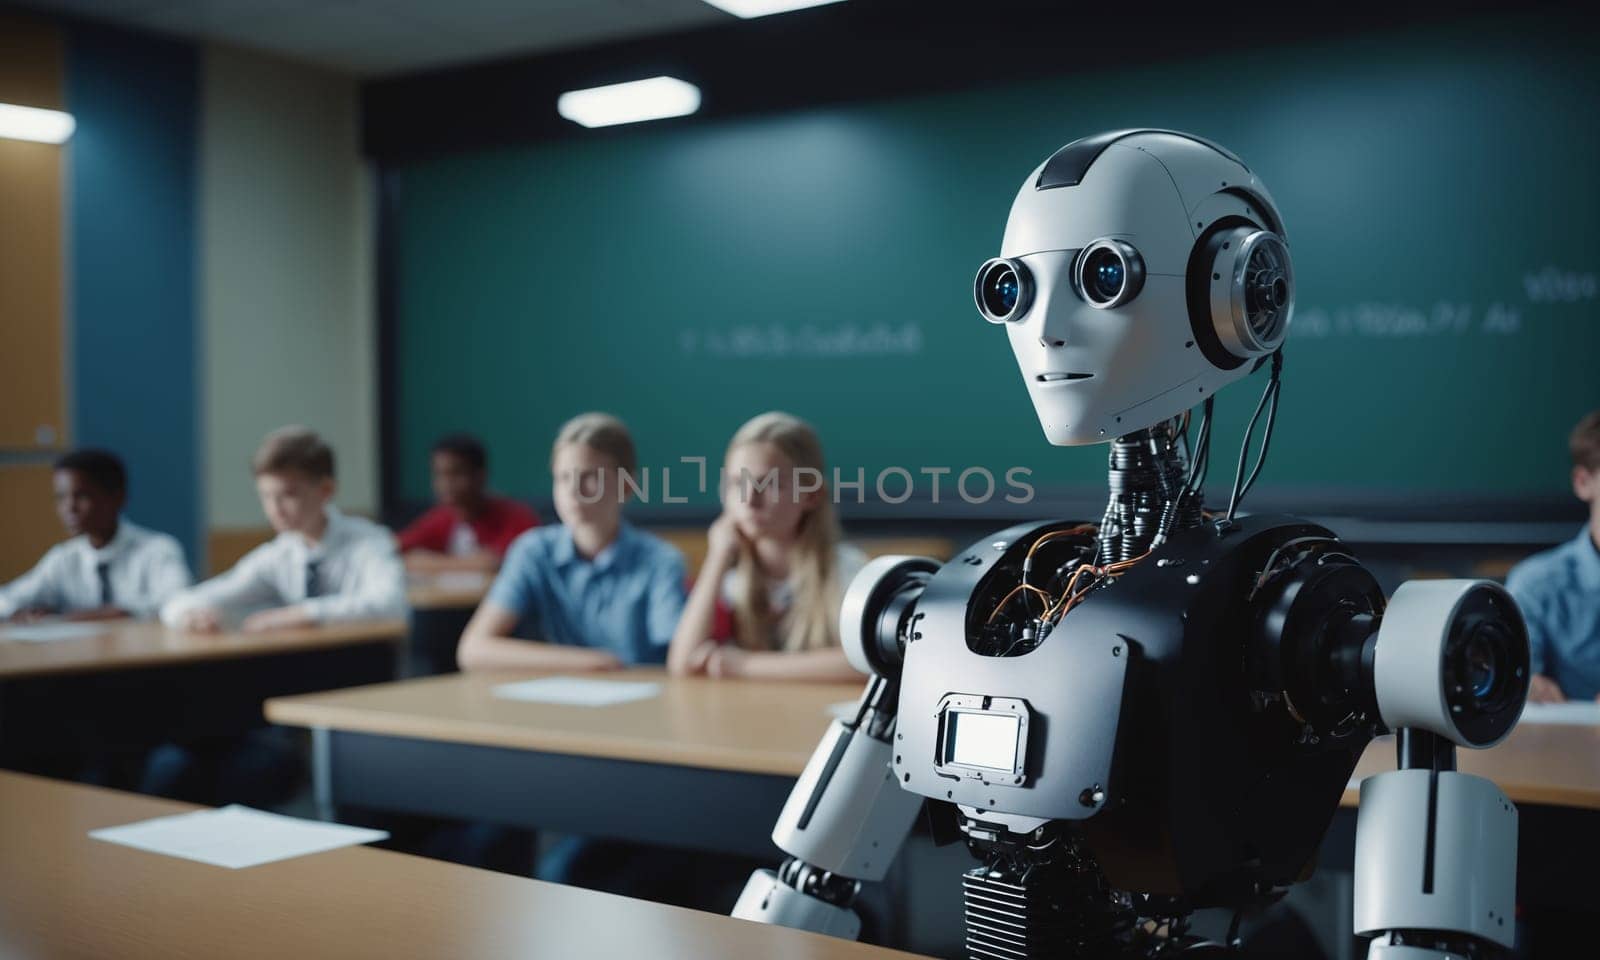 A machine resembling a robot is stationed at a desk in a classroom, surrounded by science students. Its metallic skull gleams under the classroom lights